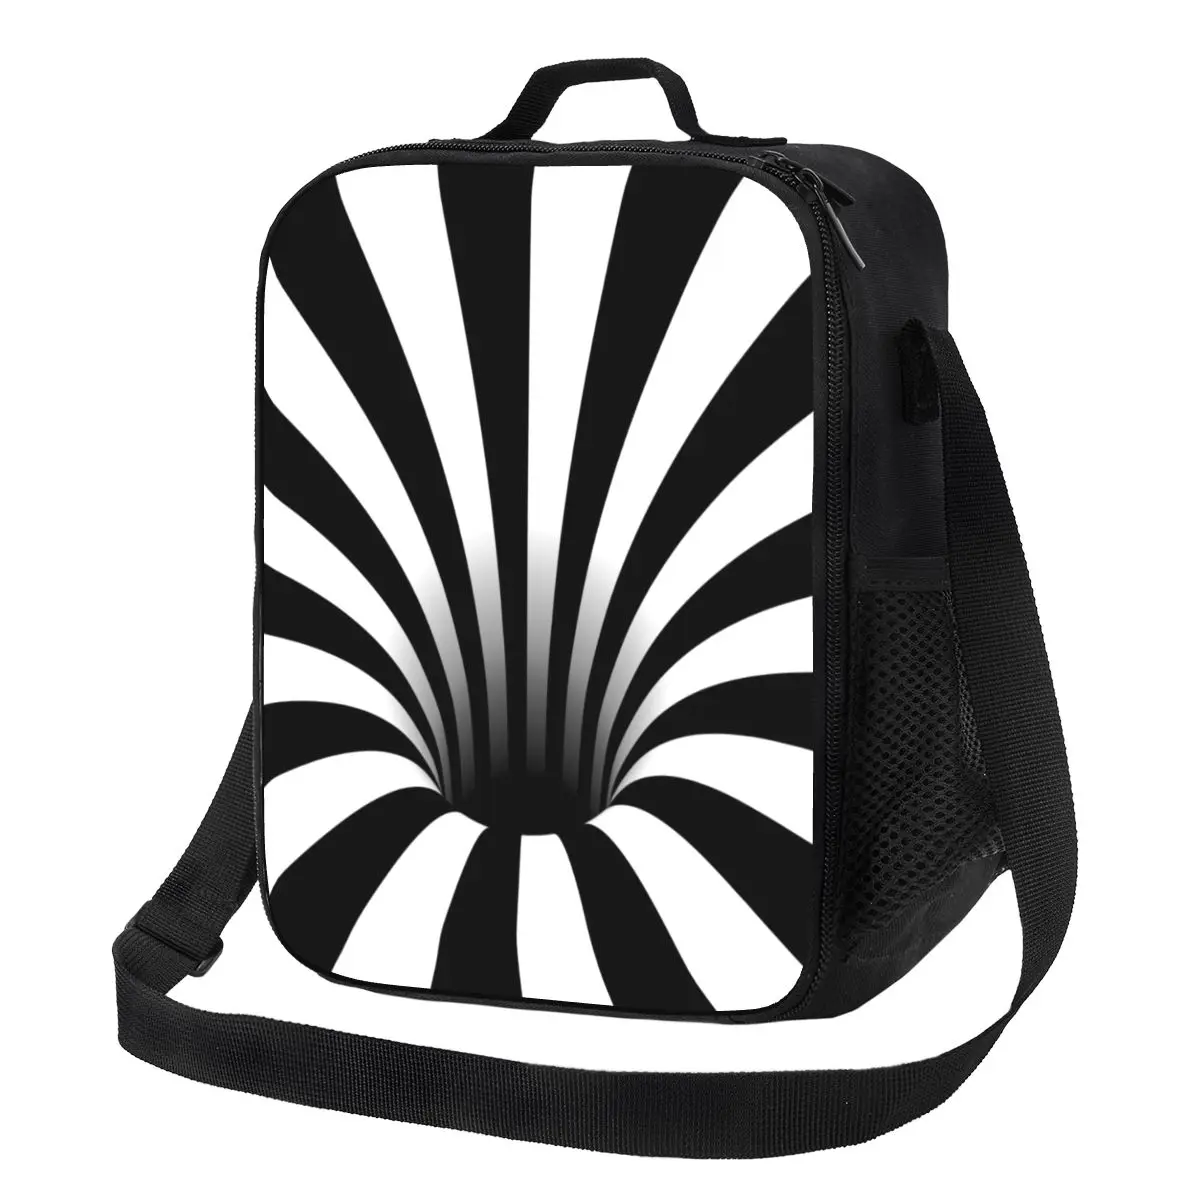 

Abstract Black Hole Thermal Insulated Lunch Bags Optical Illusion Black And White Lines Portable Lunch Tote for